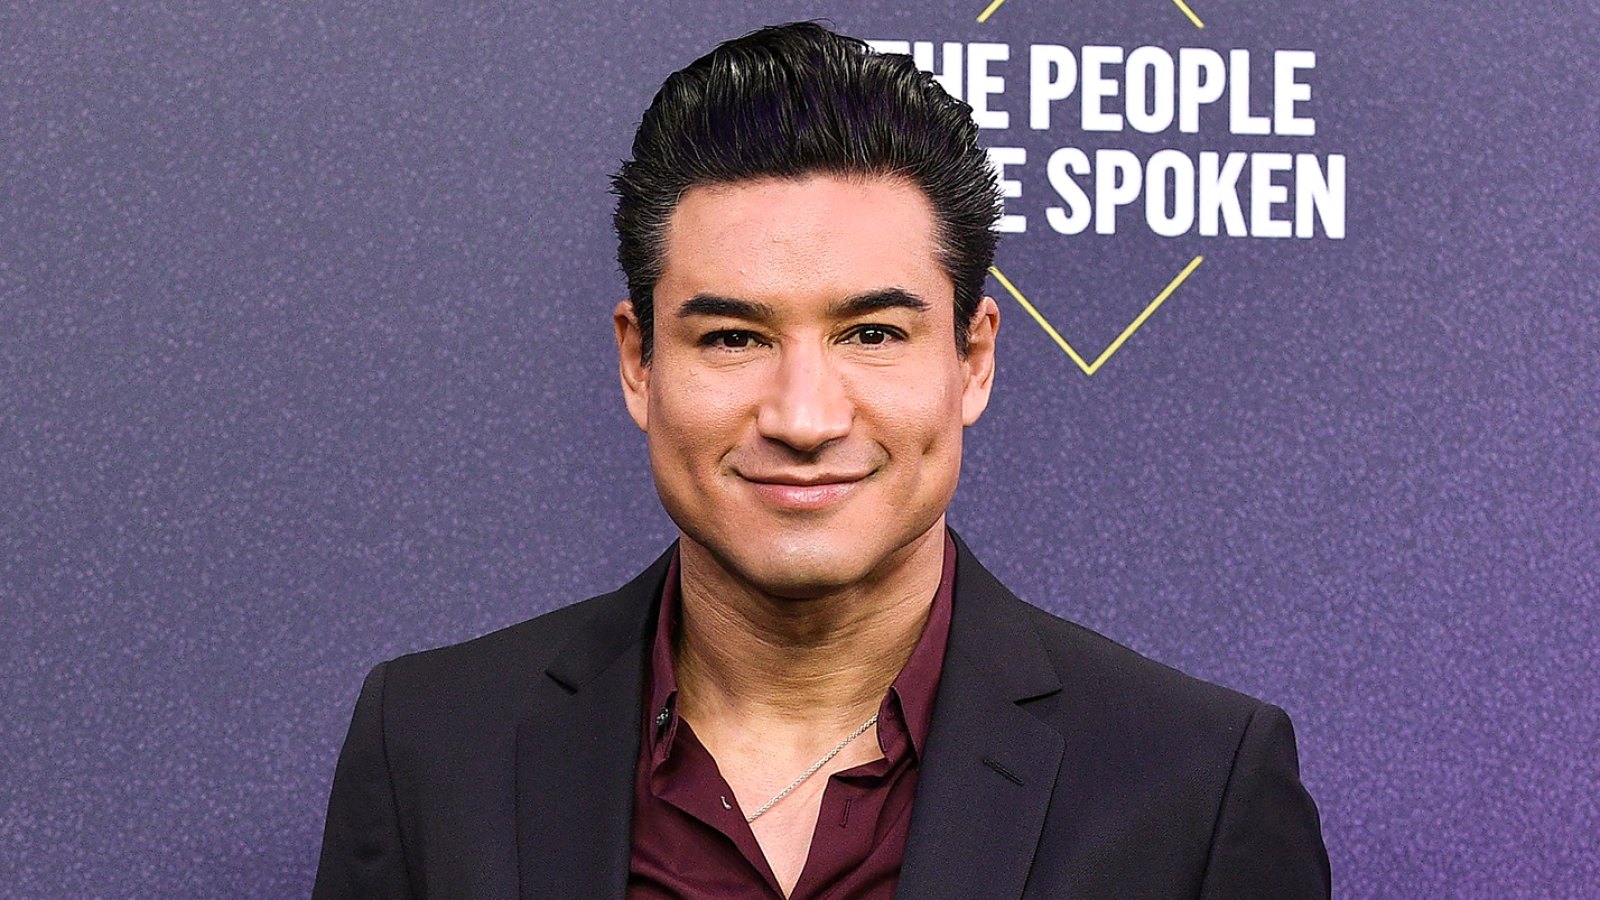 Mario Lopez: 25 Things You Don’t Know About Me